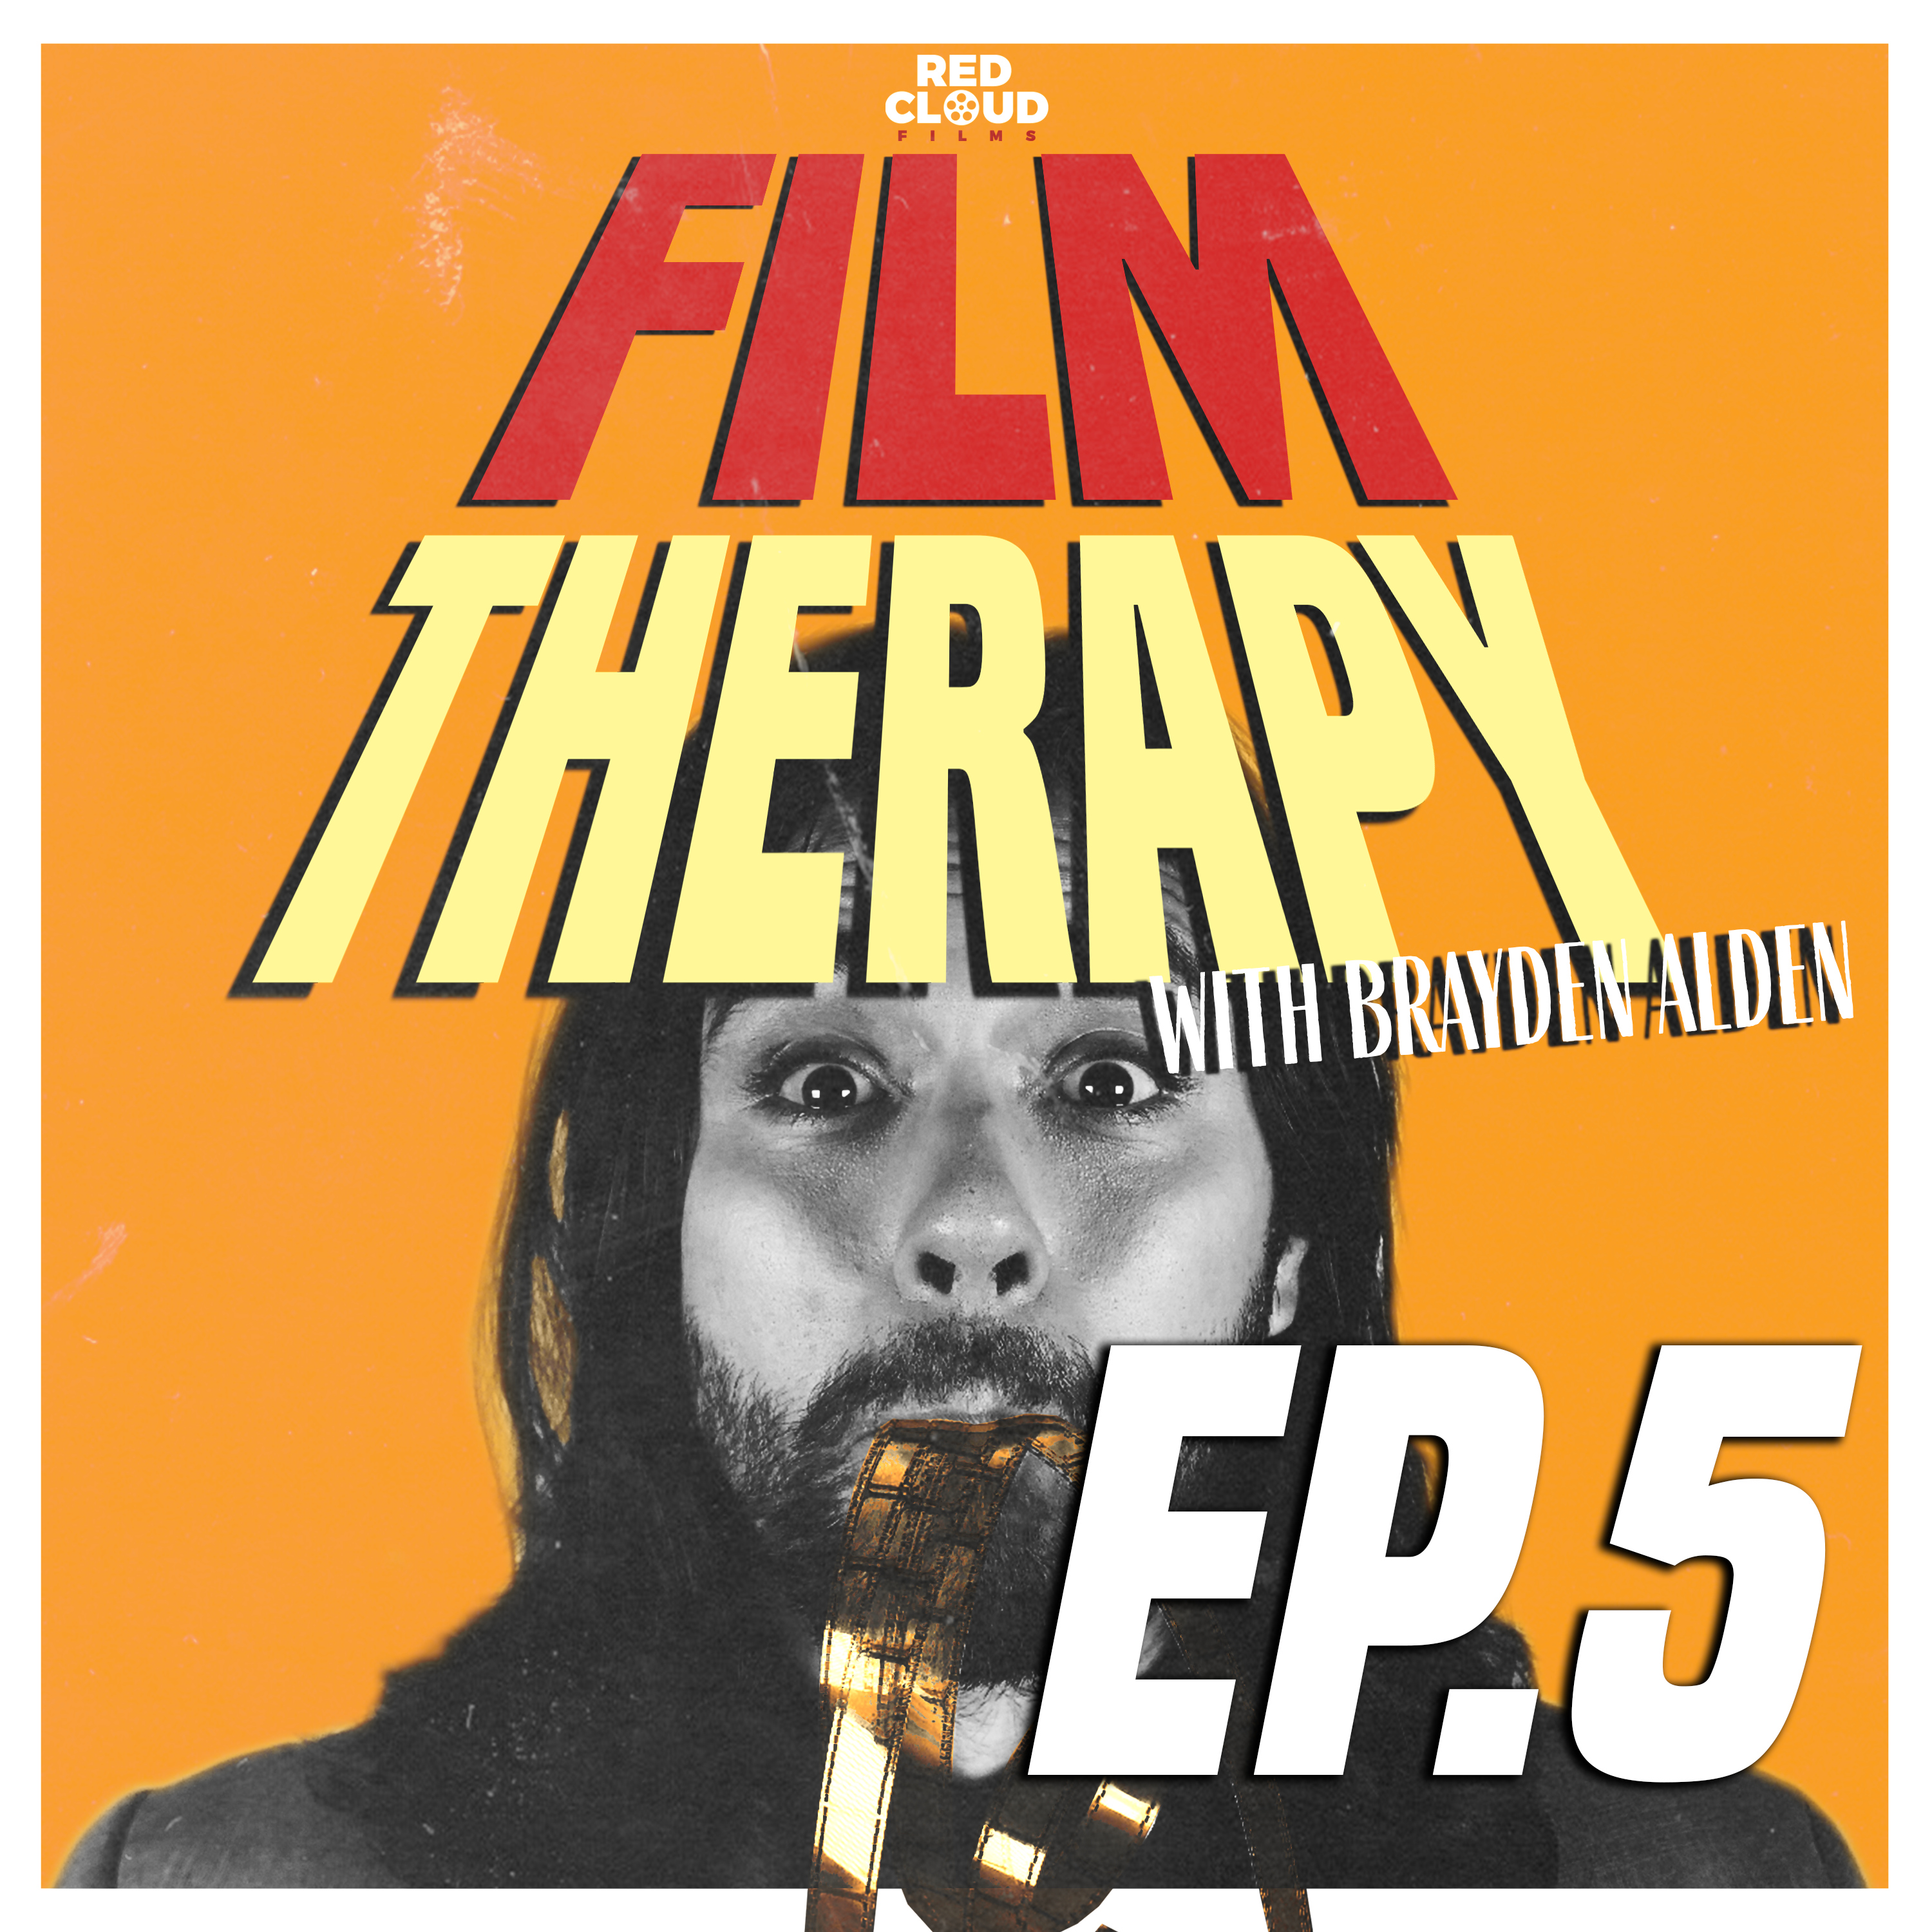 Red Cloud Films - FILM THERAPY EPISODE 1